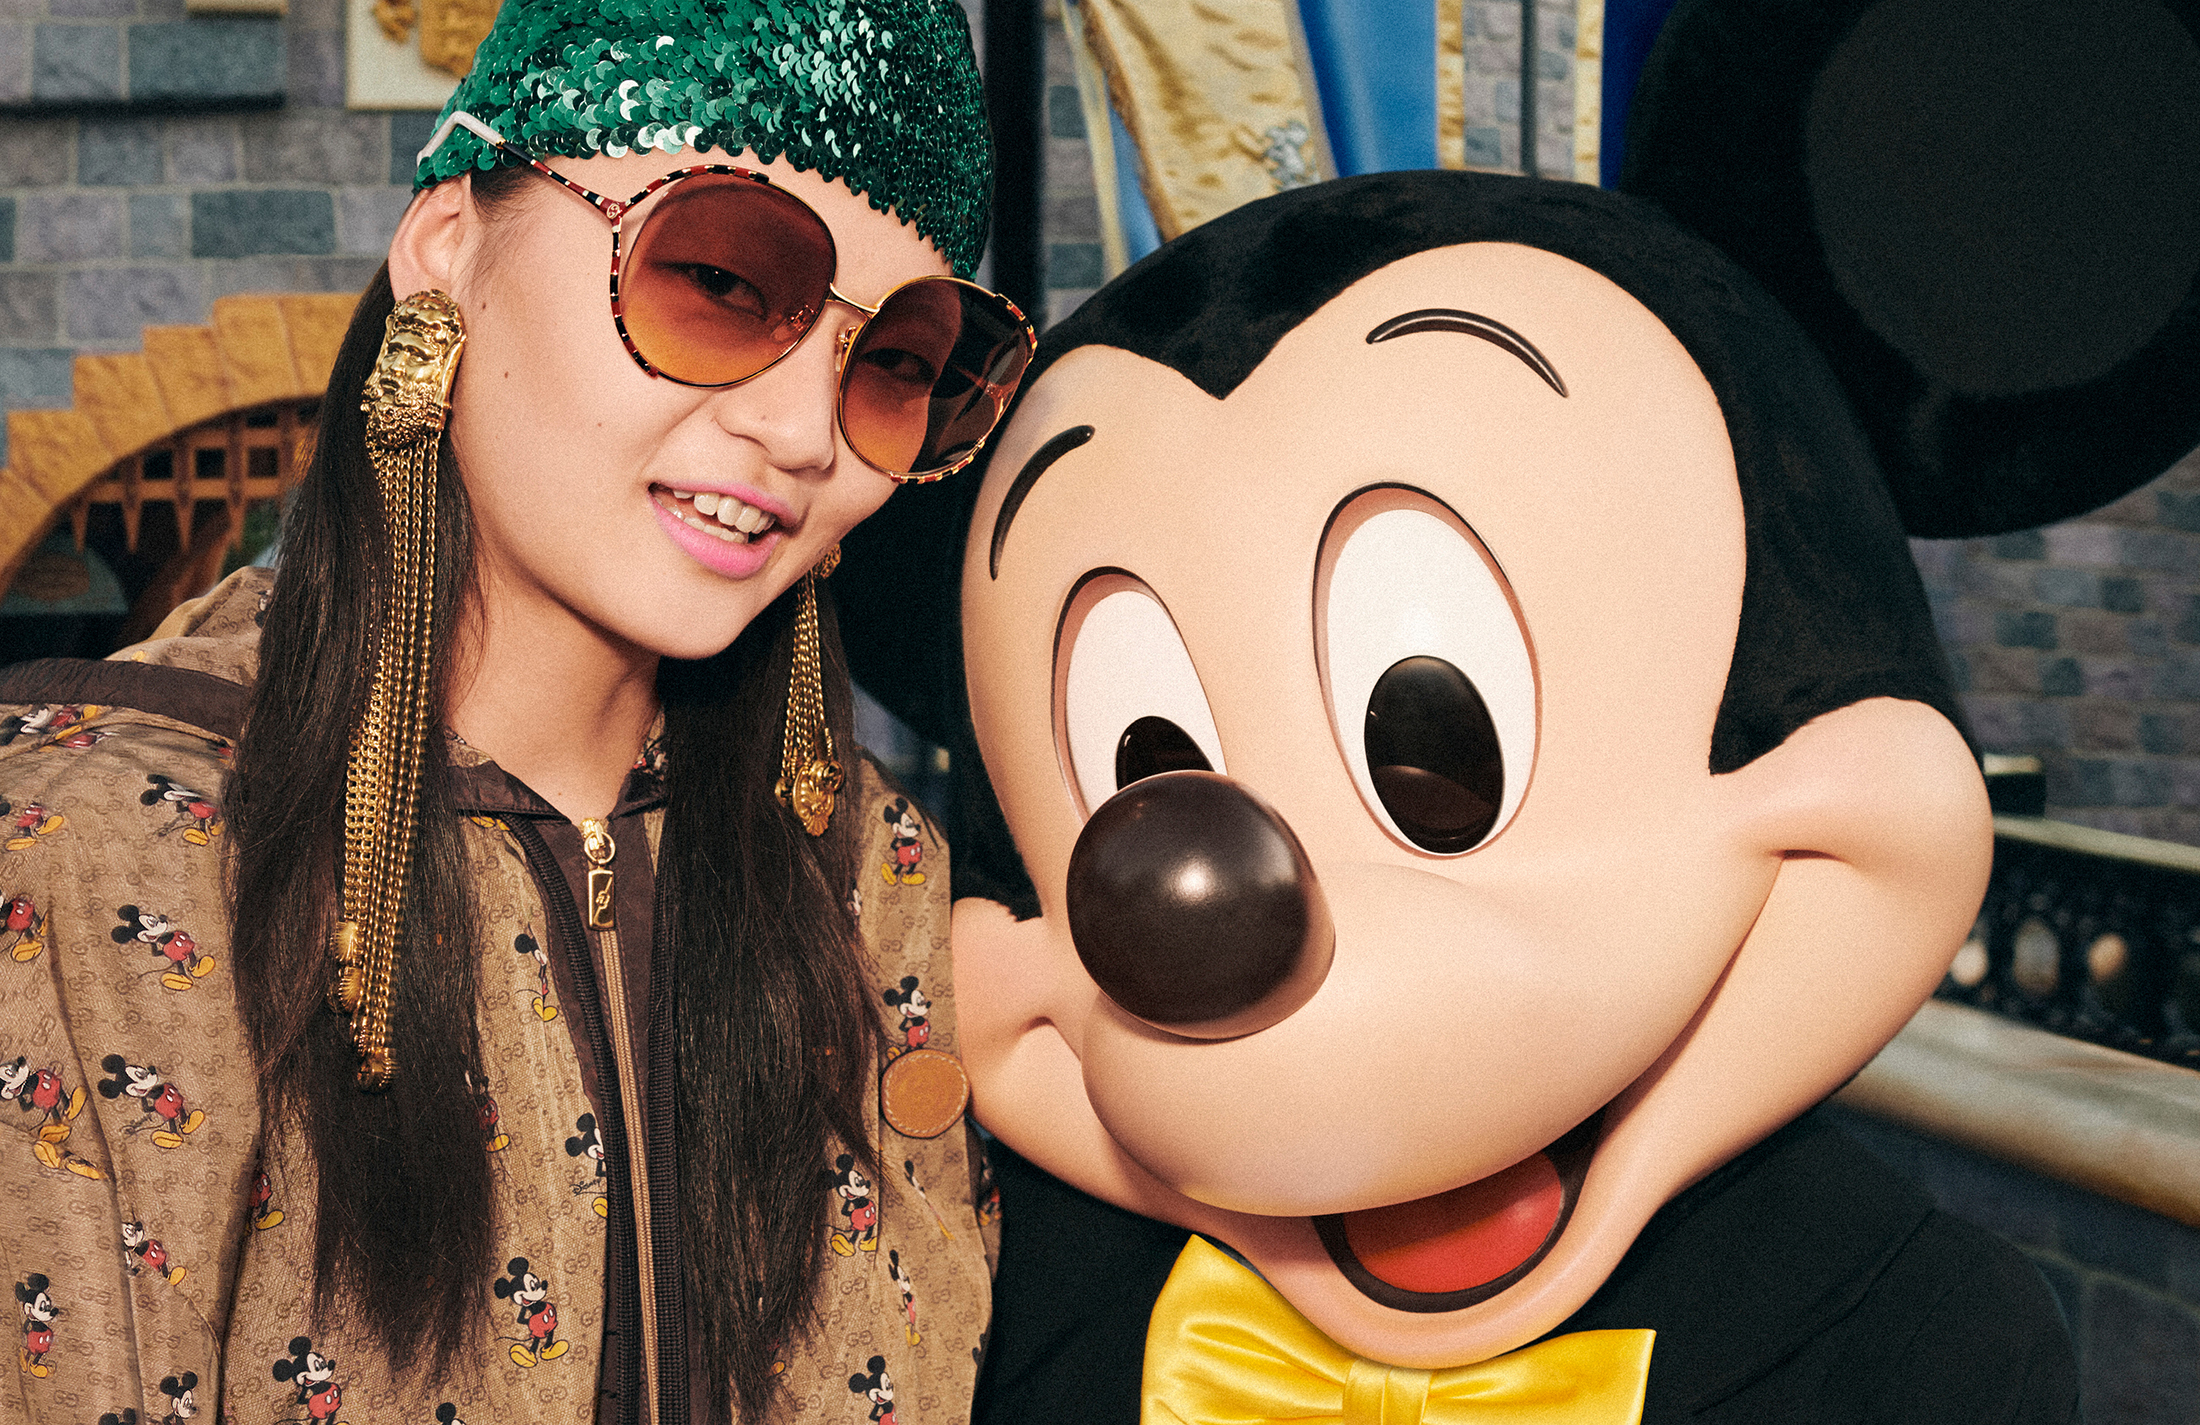 Disney x Gucci Mickey Mouse Chinese New Year Collab